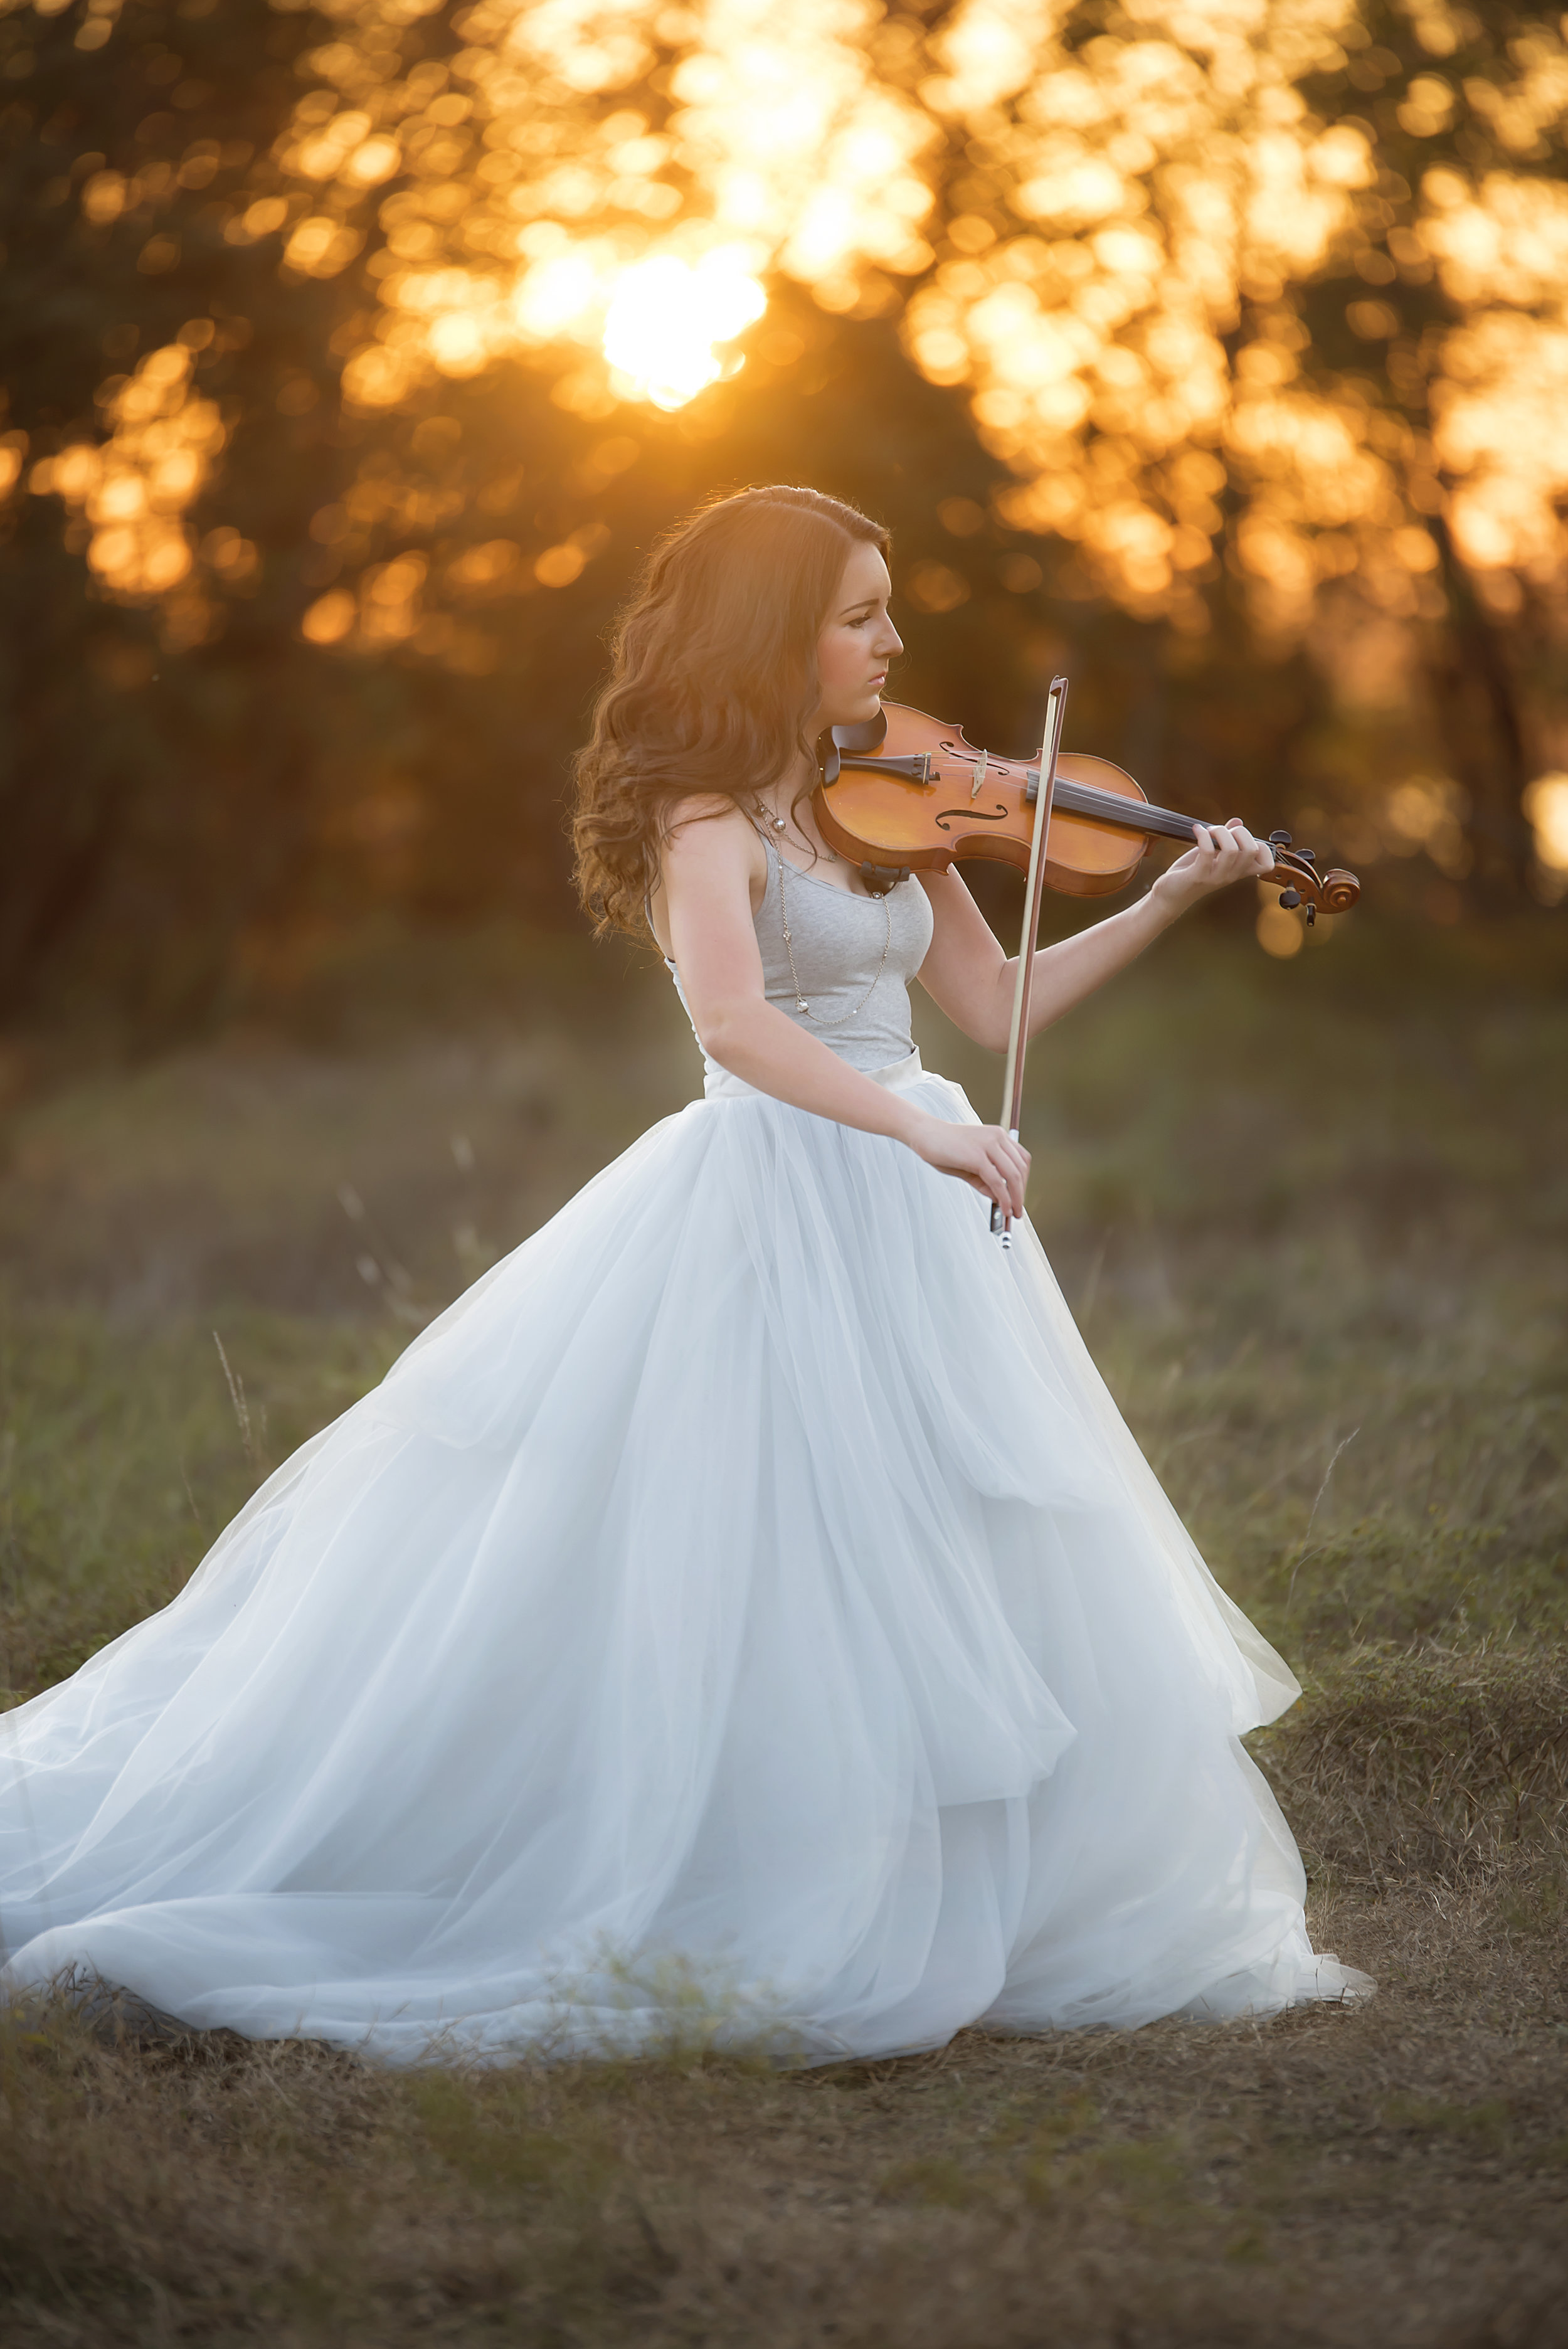  Woman in white dress playing violin in a green field at sunset. 